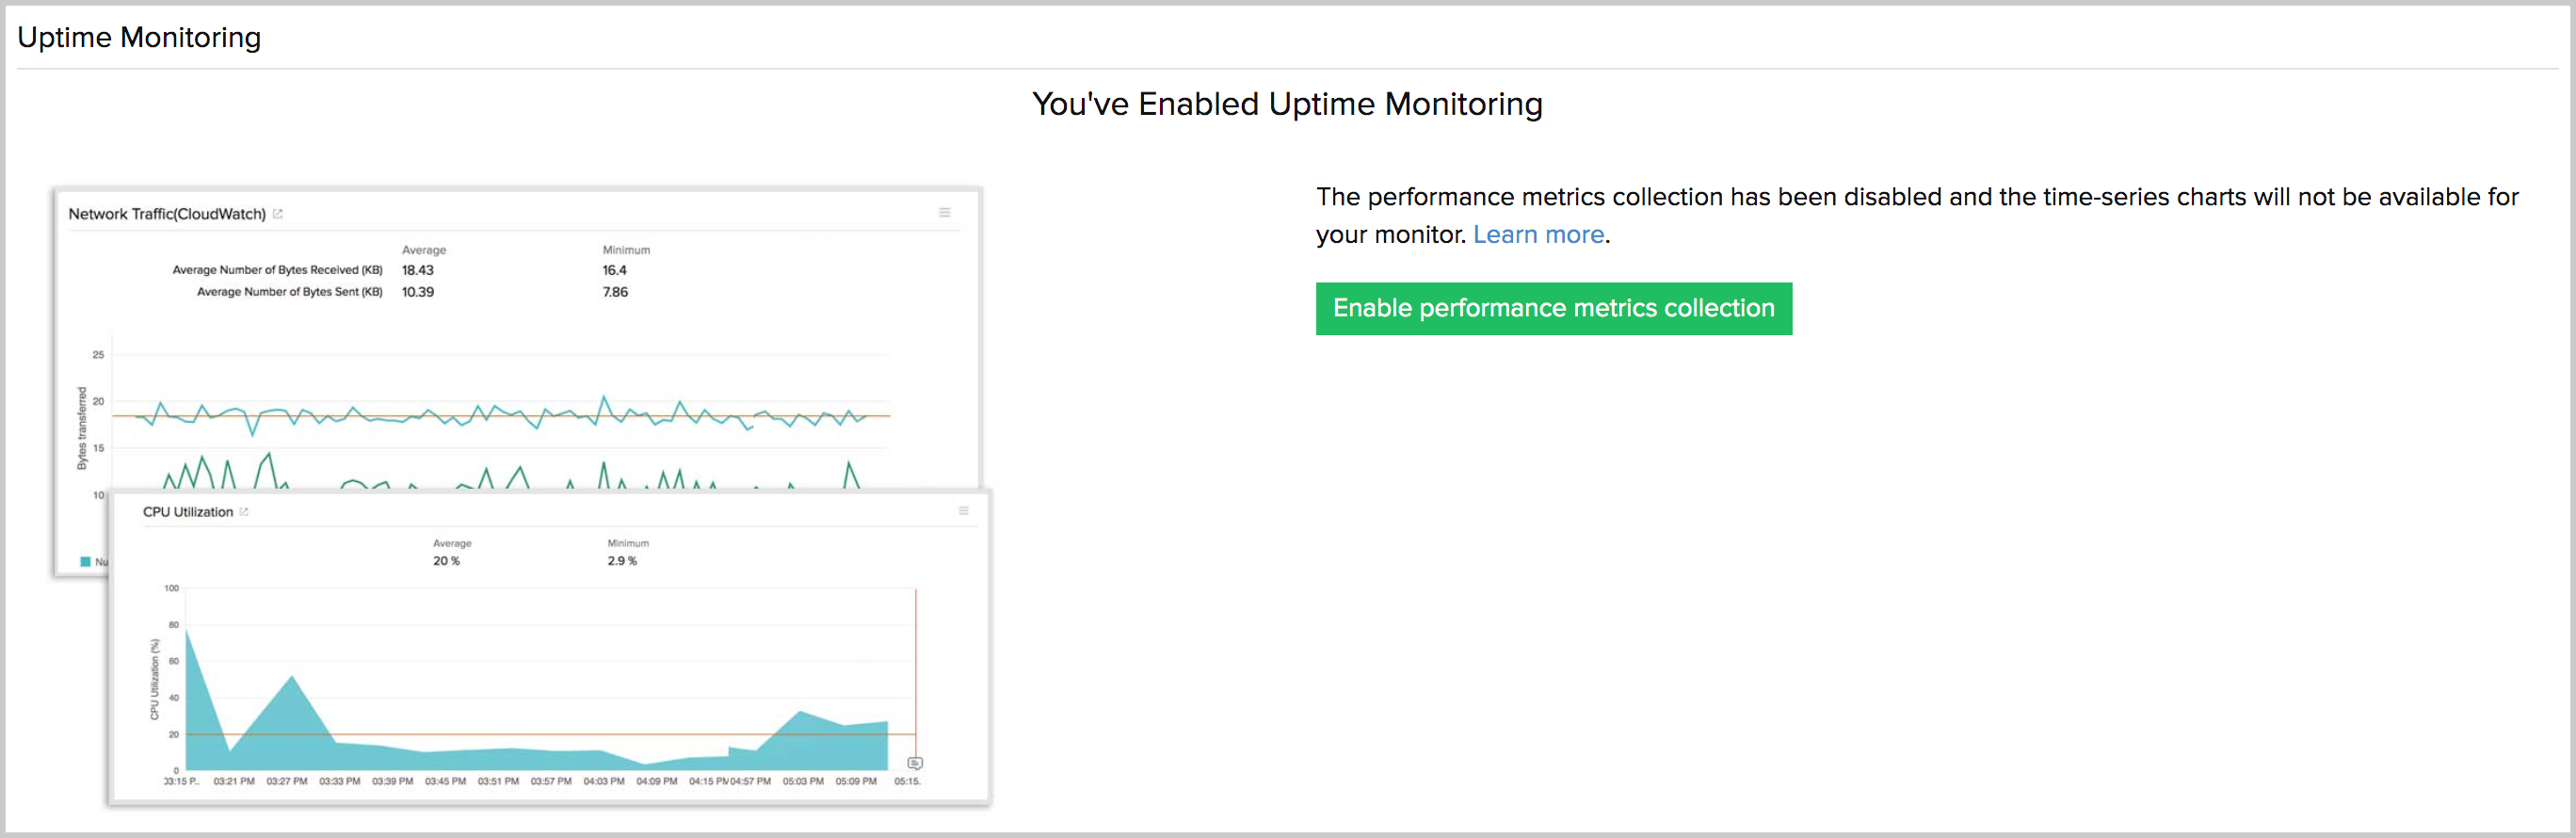 uptime monitoring enabled for AWS resources